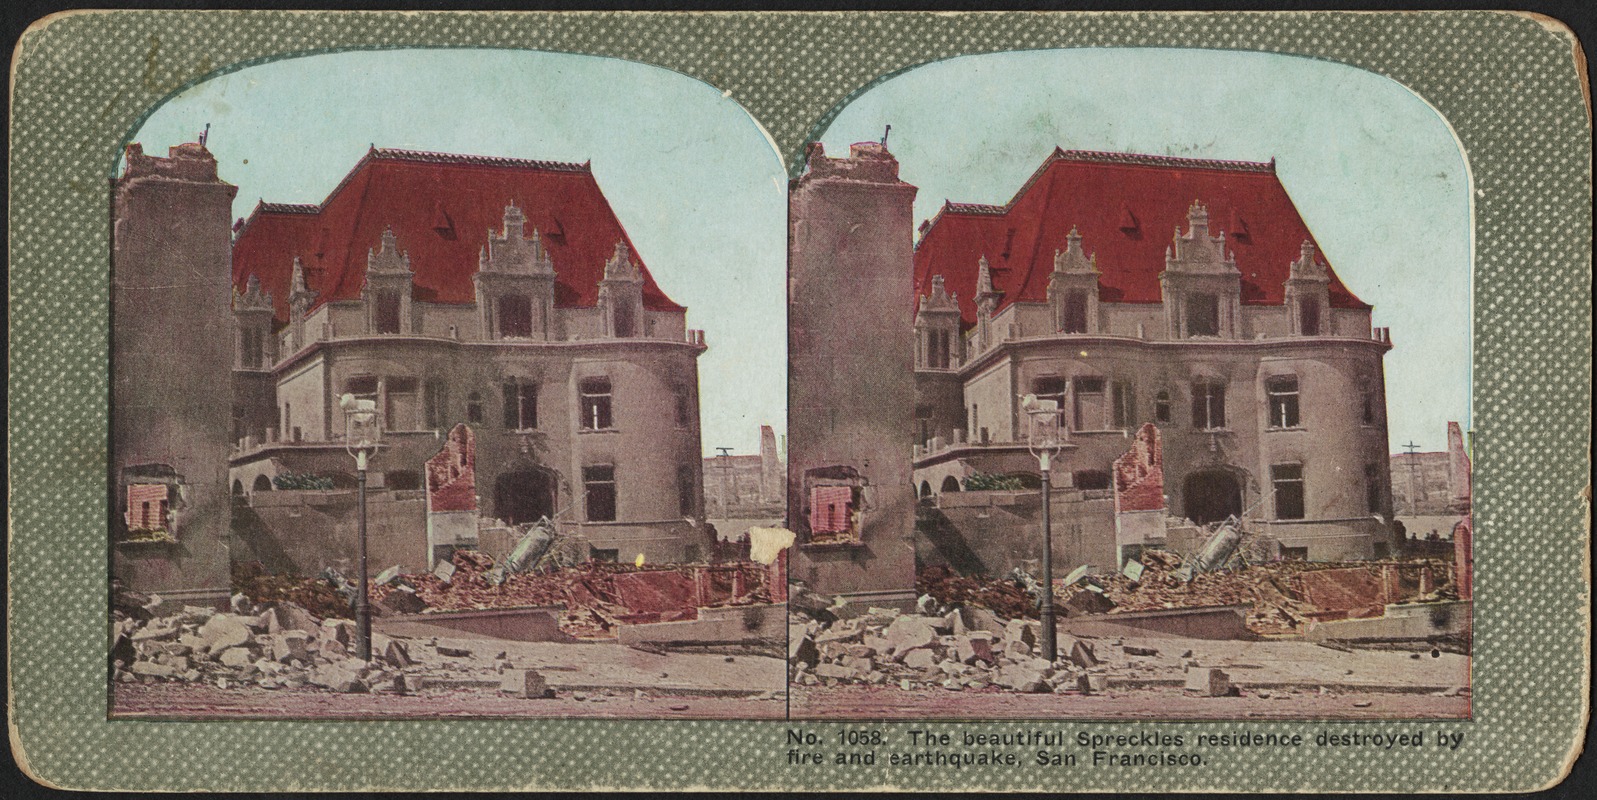 The beautiful Spreckles residence destroyed by fire and earthquake, San Francisco